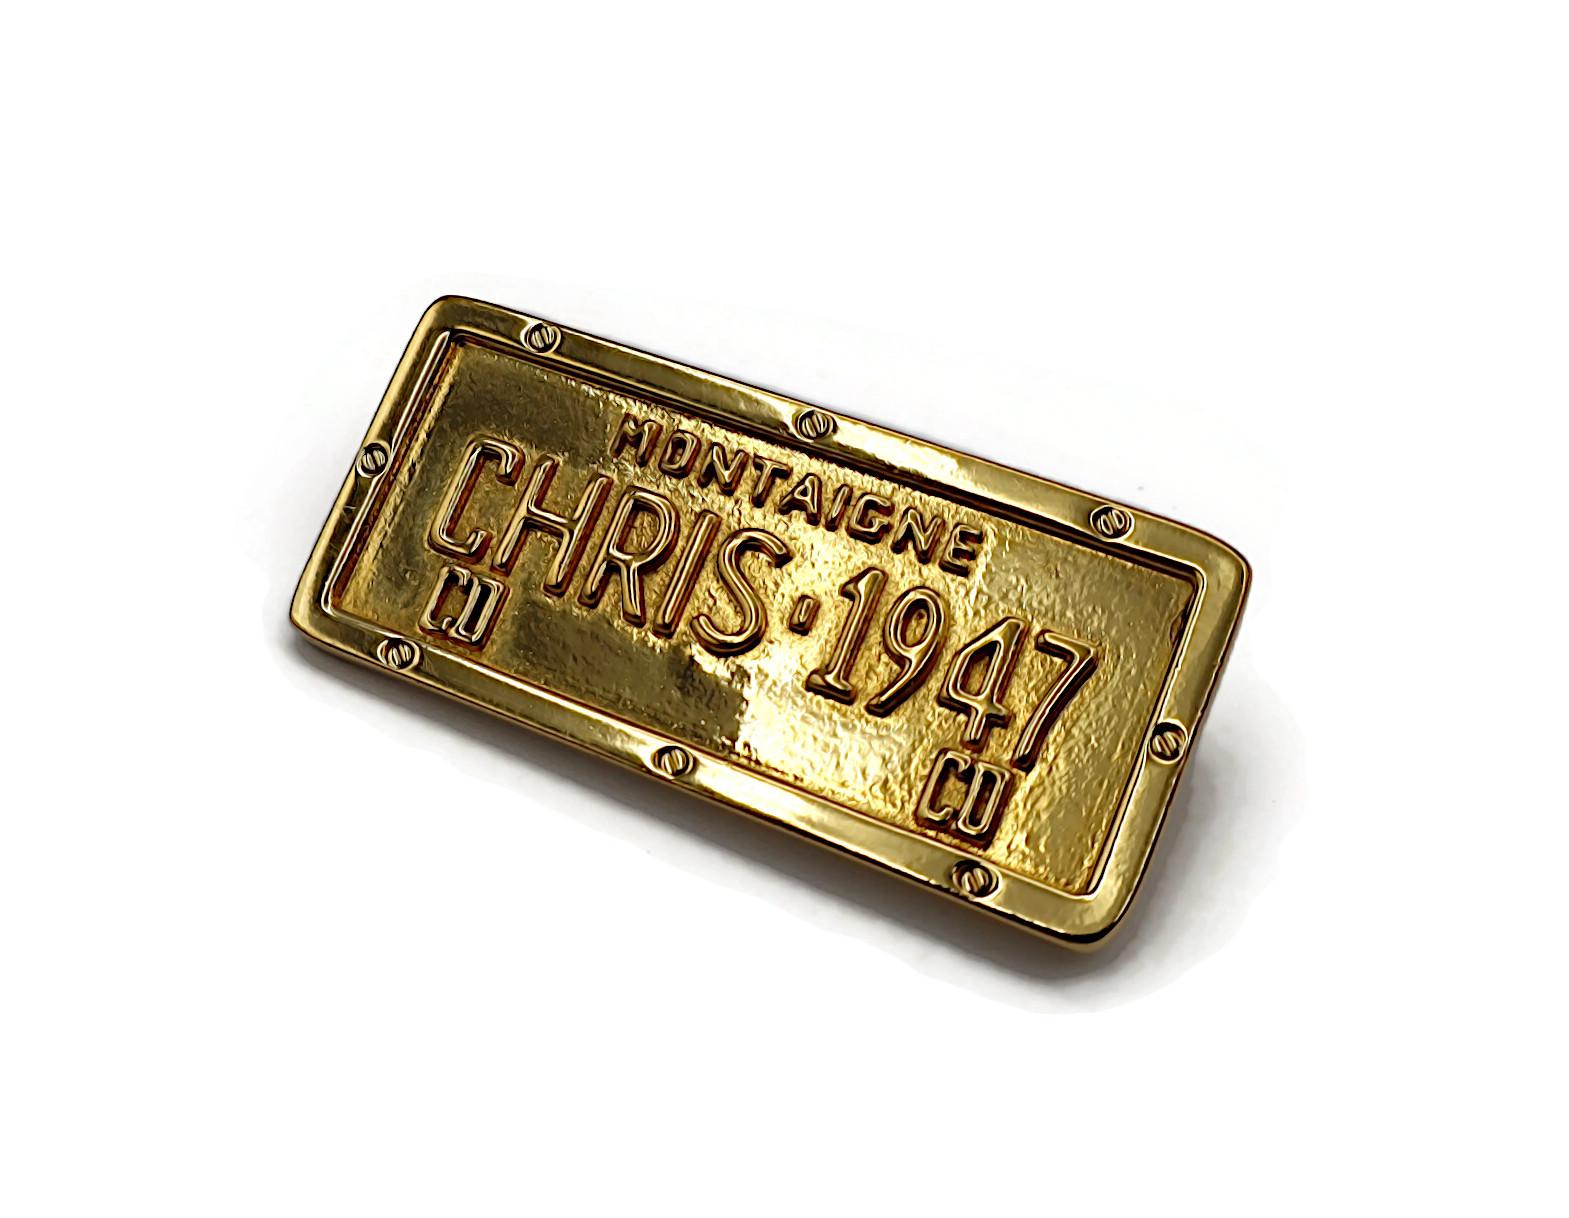 CHRISTIAN DIOR by JOHN GALLIANO Gold Tone Cadillac License Plate Brooch For Sale 1